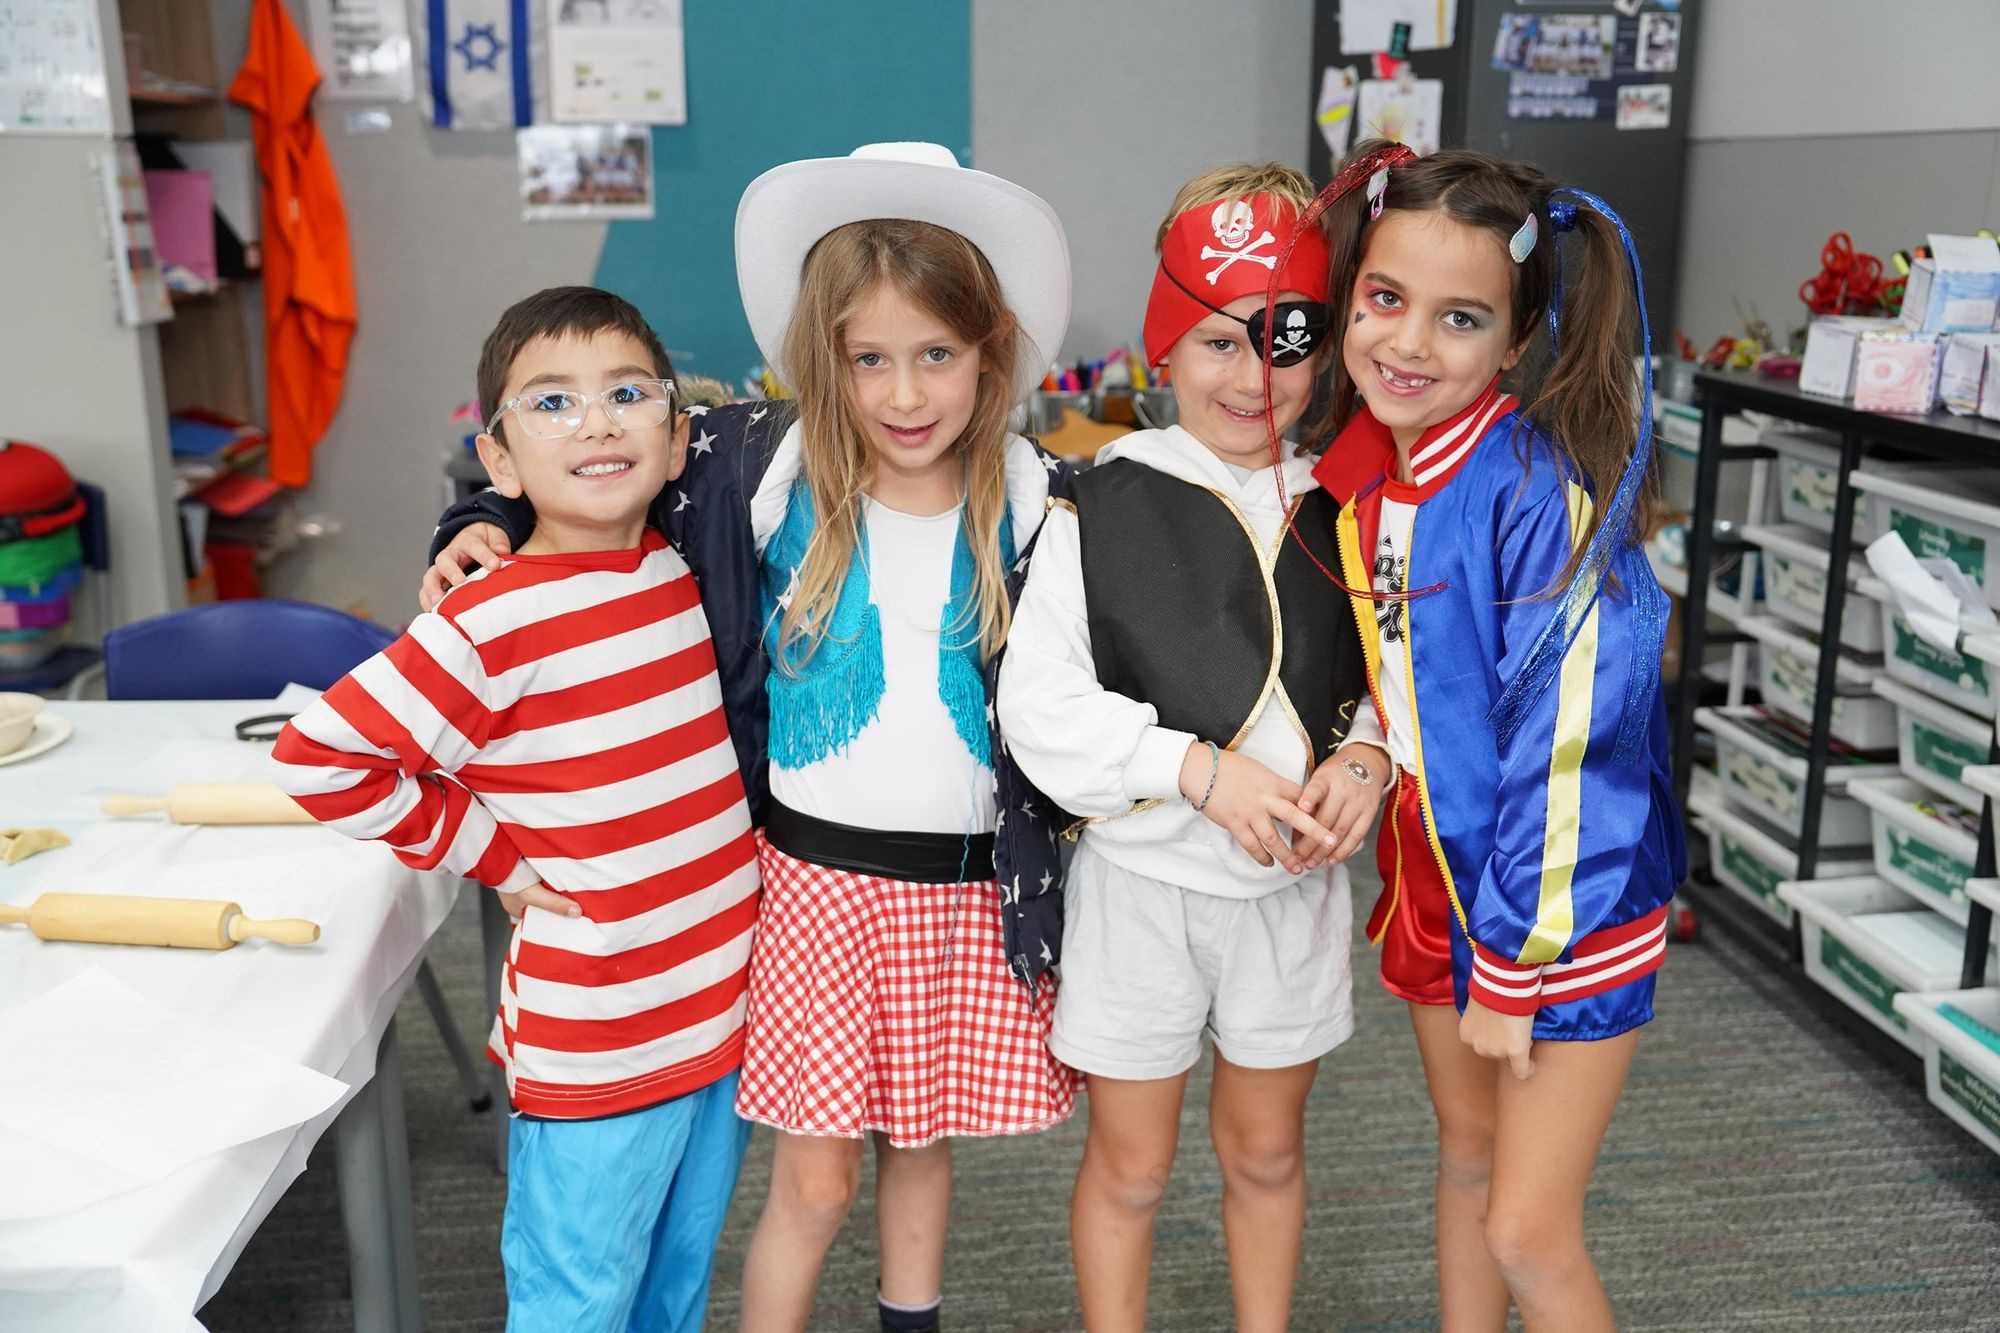 Children dressed in costume as Where's Wally, a Cowgirl, a Pirate and a Cheerleader in shorts smile at the camera. They are celebrating Purim.